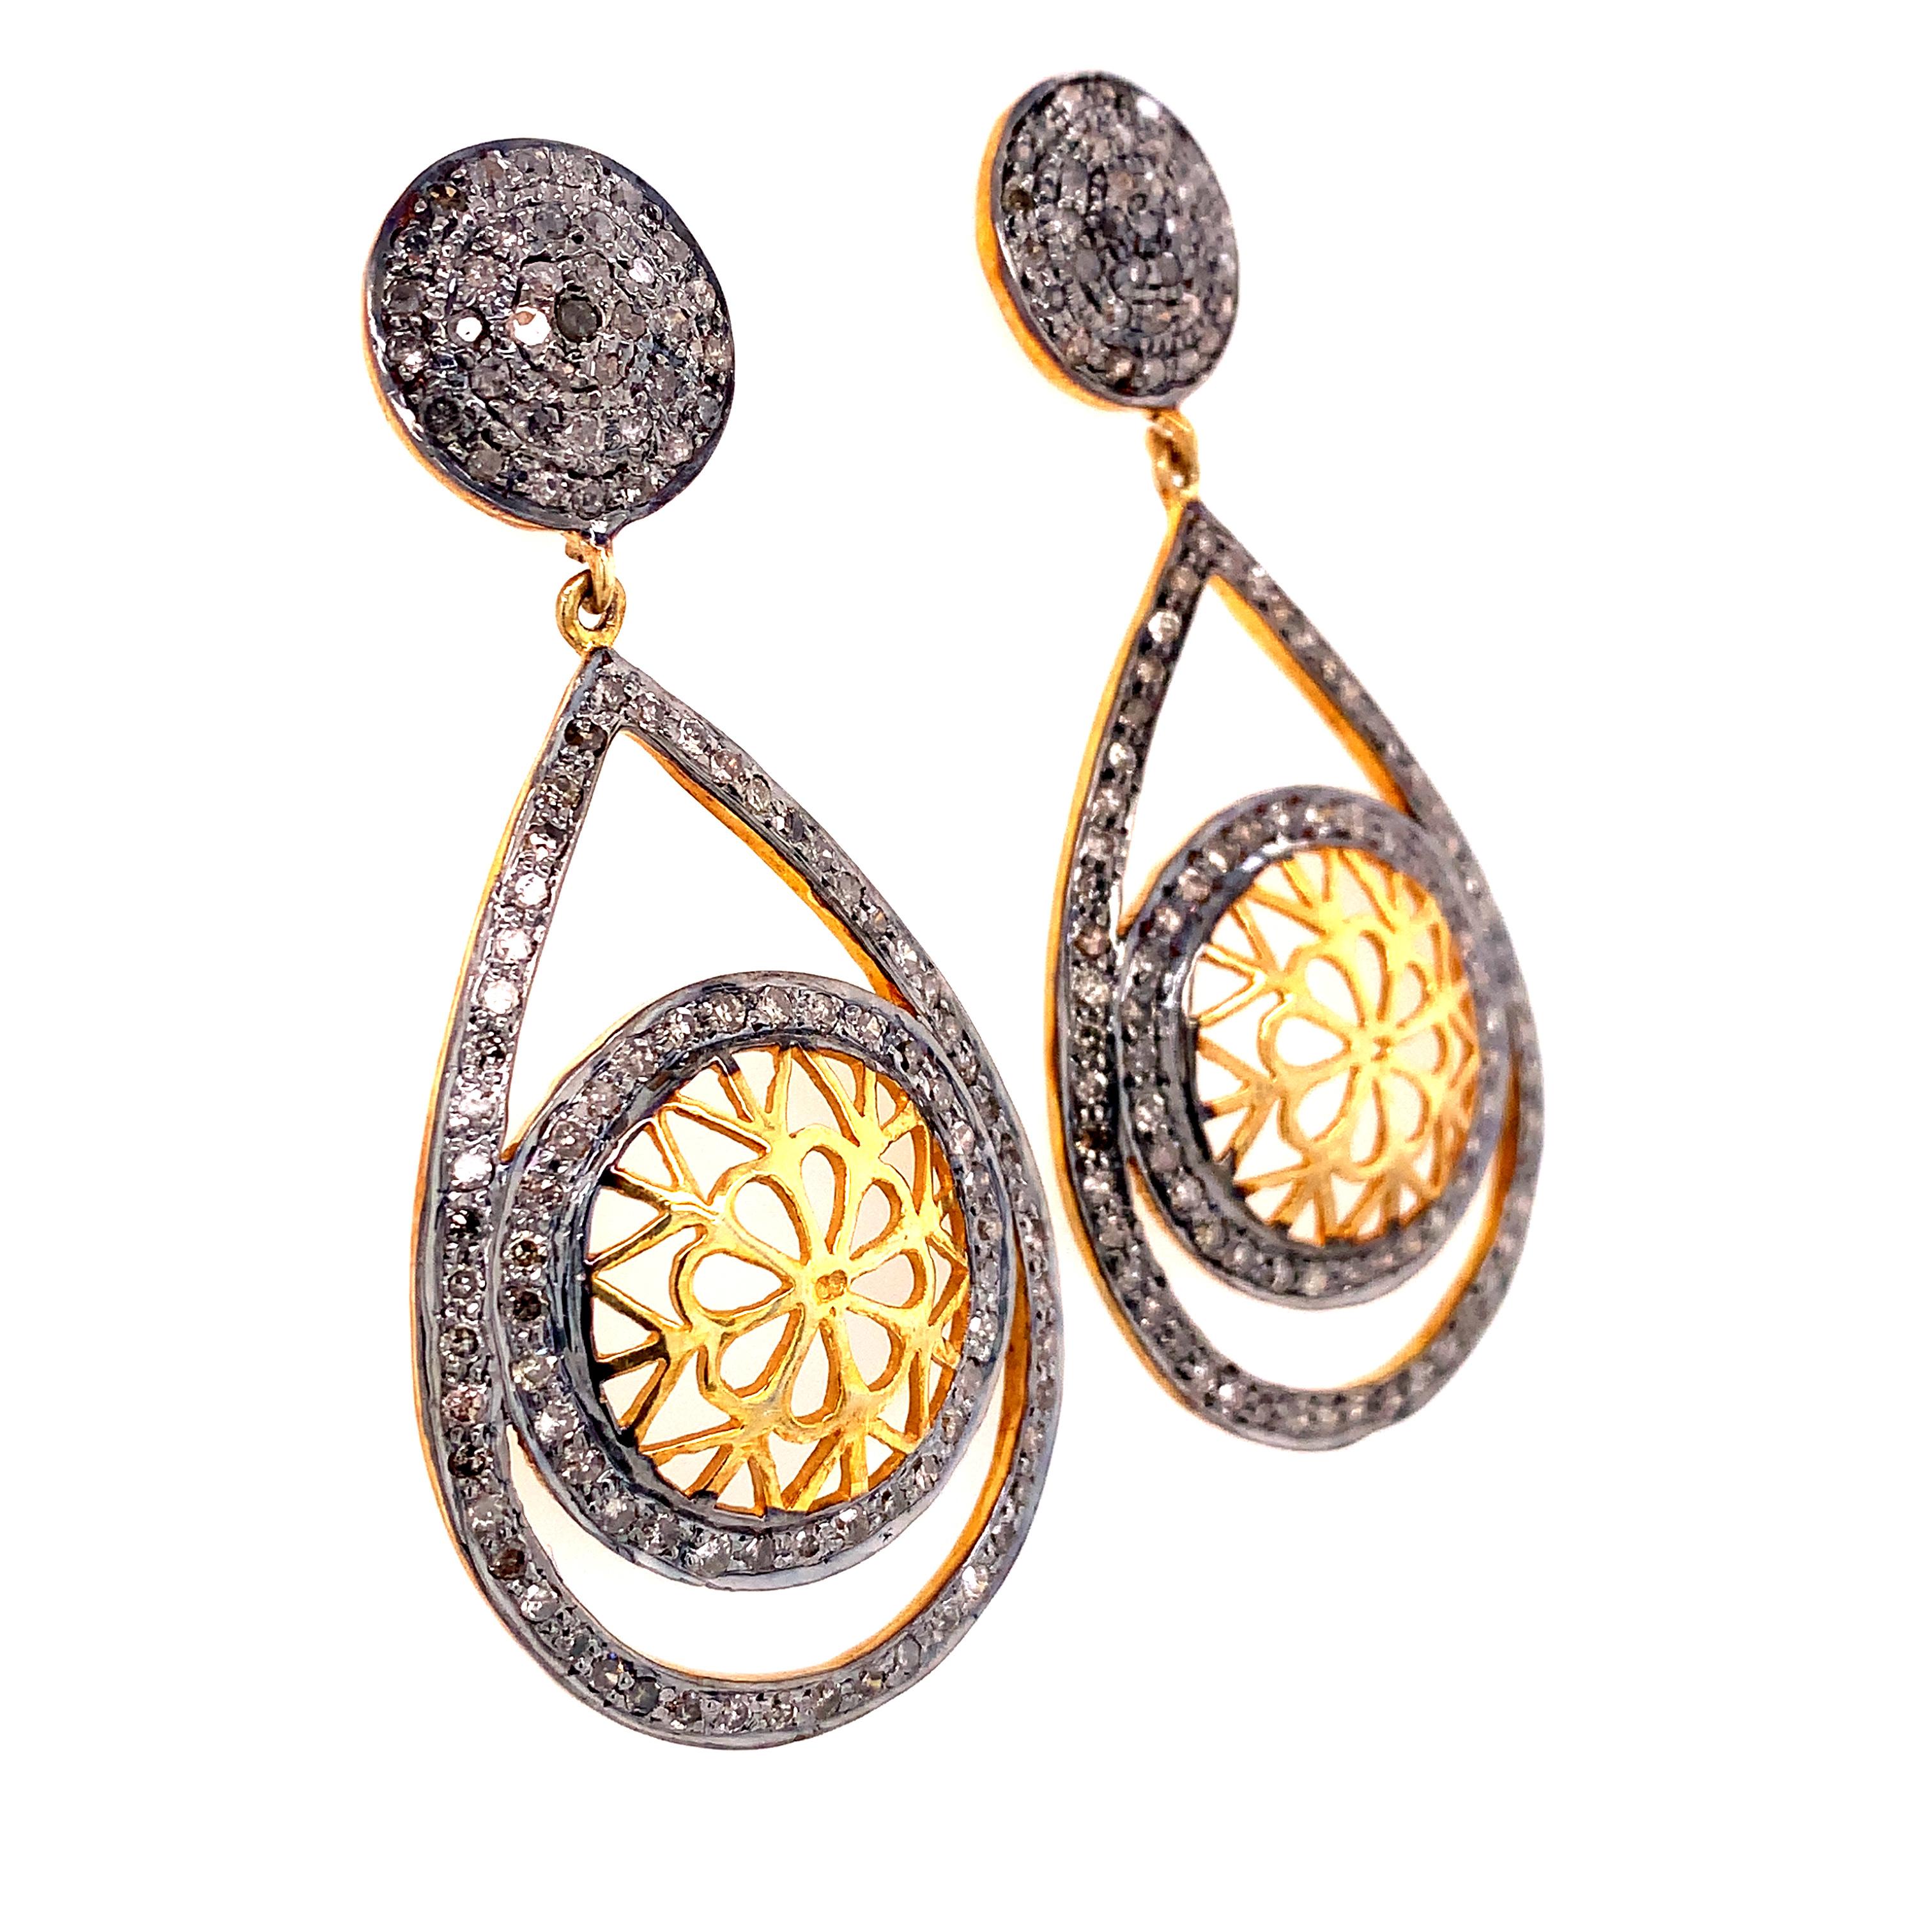 Rustic Collection 

These edgy yet feminine drop earrings feature both black and rustic Diamonds with a swirl motif. Set in sterling silver and 14K gold plating. 

Rustic Diamond: 3.10ct total weight.